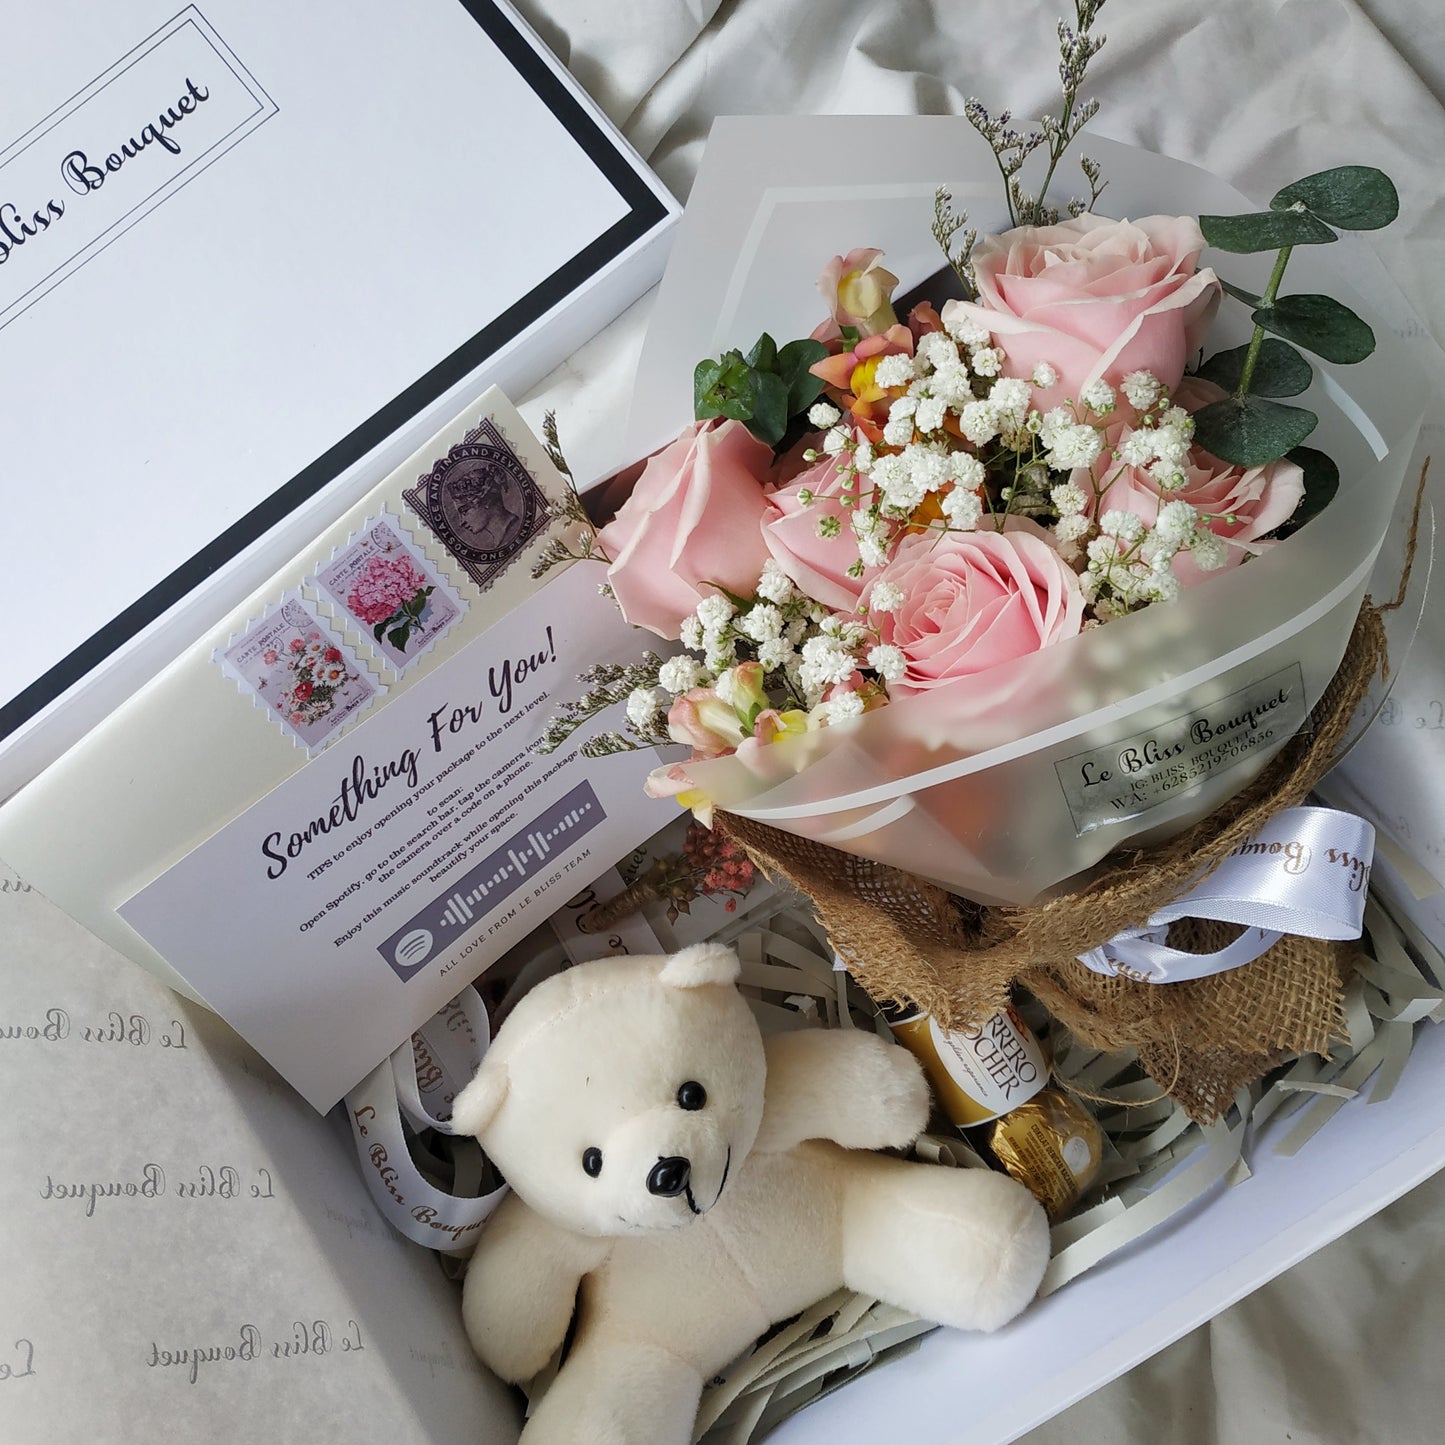 Premium Gift Box with Fresh Roses - Le Bliss Bouquet